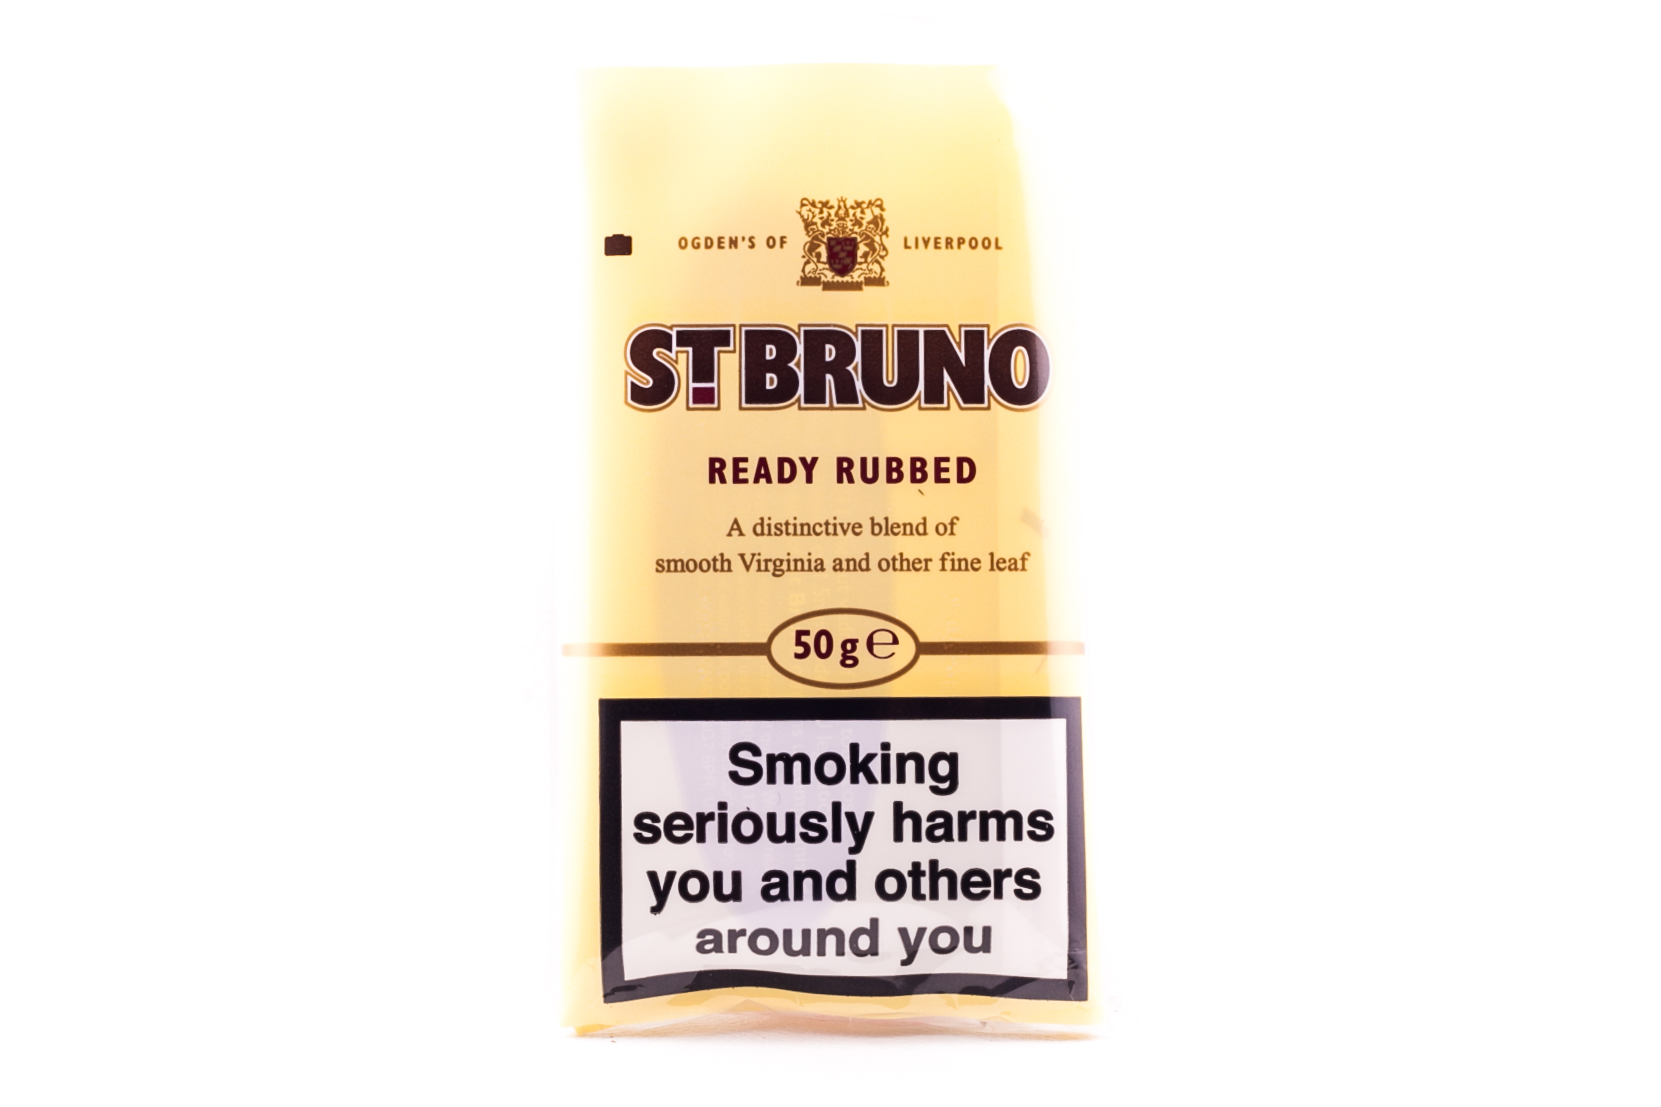 St Bruno Ready Rubbed Tobacco 50g